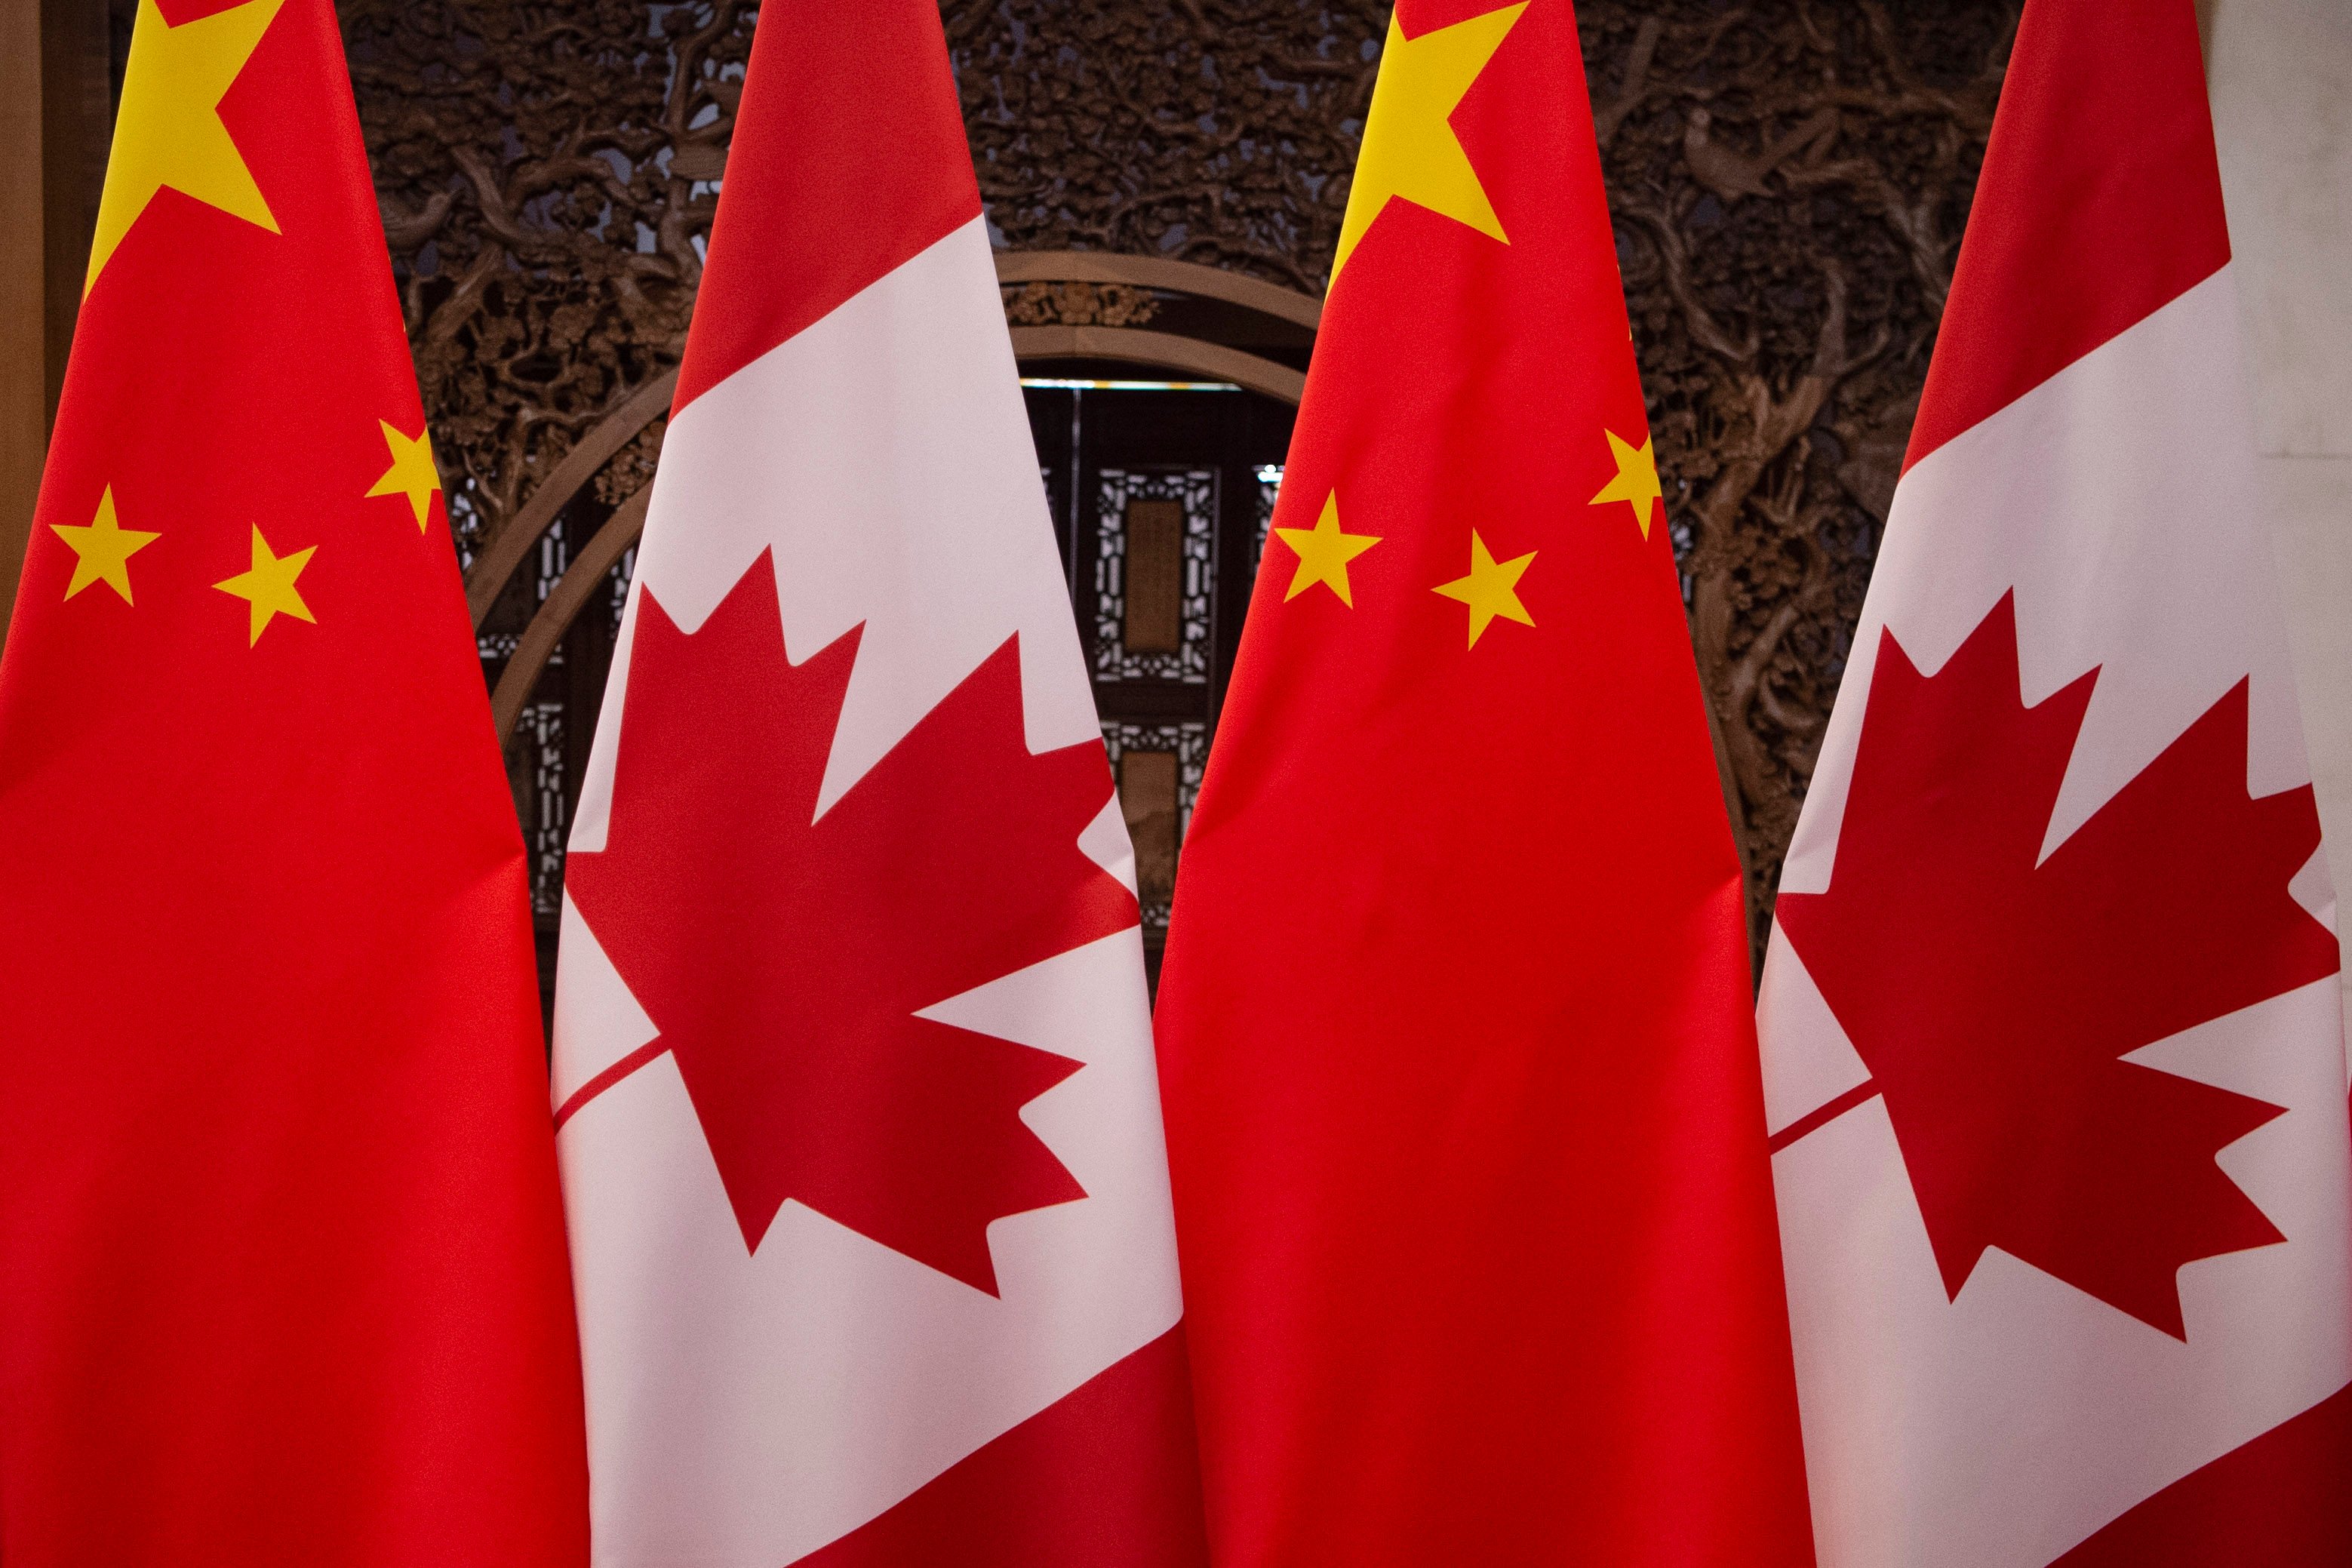 Canadian media outlets have published several reports alleging schemes run by the Chinese government to interfere in Canada’s last two elections. Beijing has denied those allegations. Photo: AFP